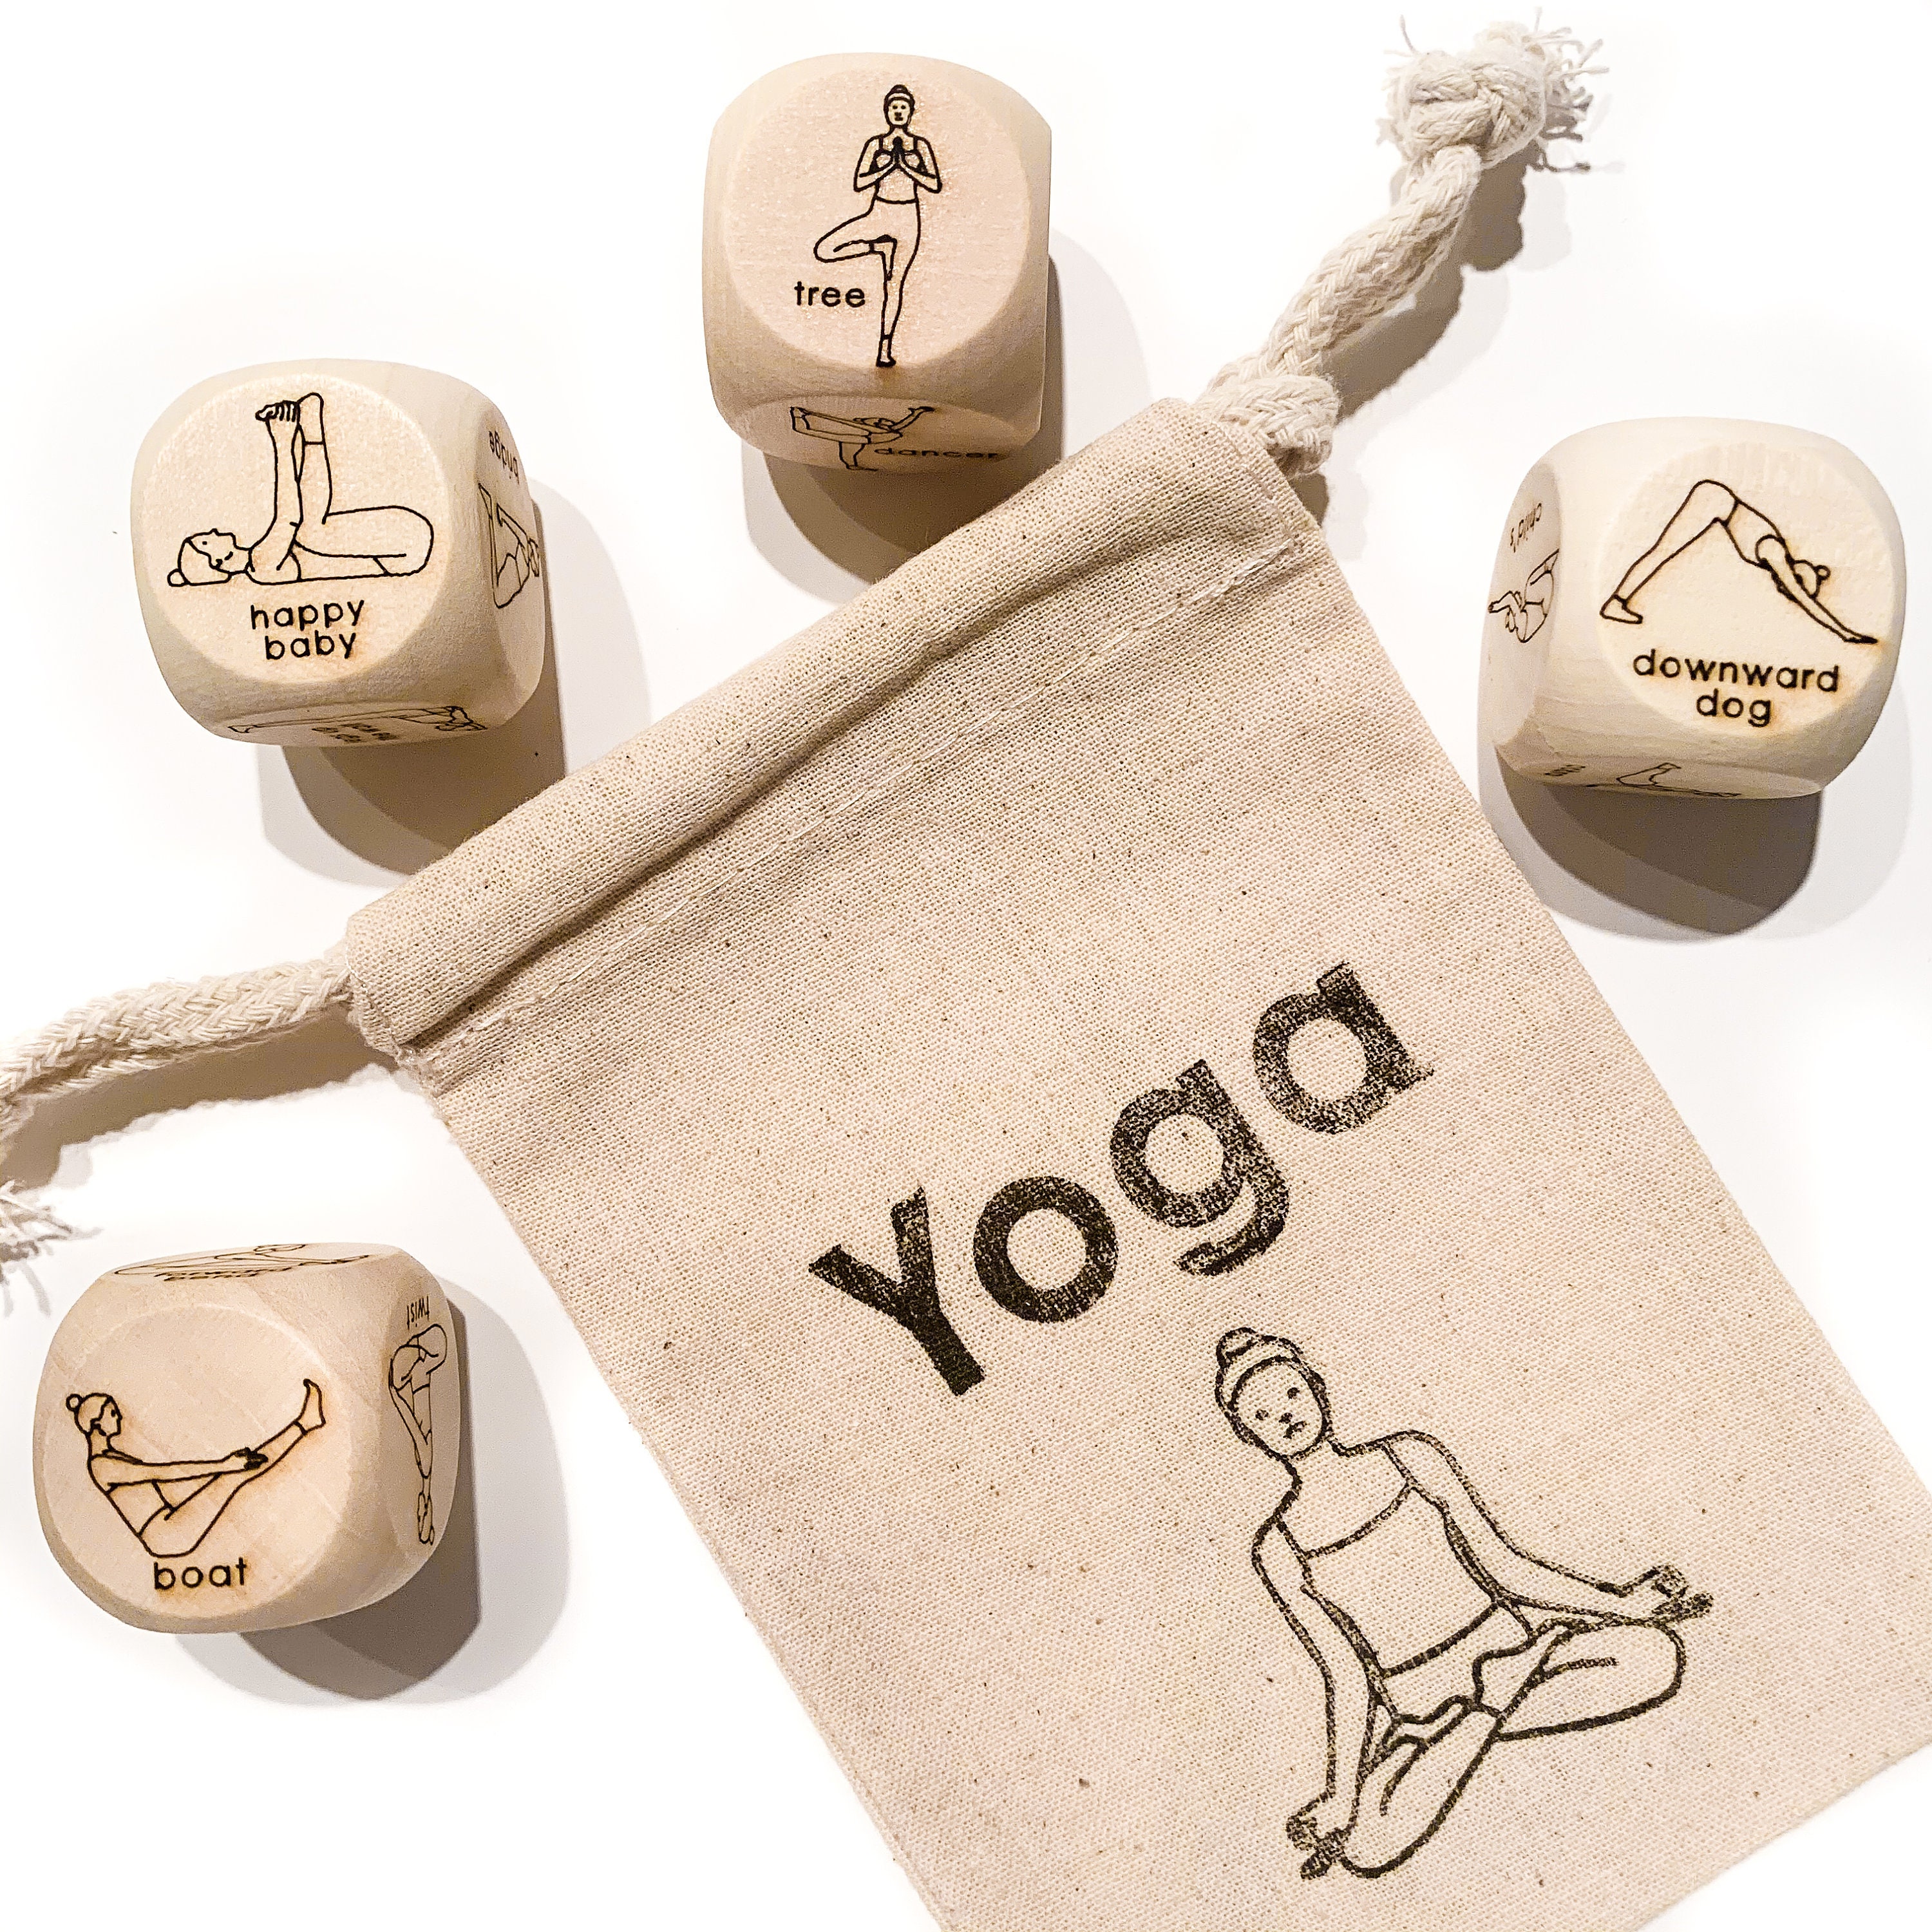 Games, Yoga Dice Kit Game Set Of 4 Dice 24 Yoga Poses Instructions  Professor Puzzle